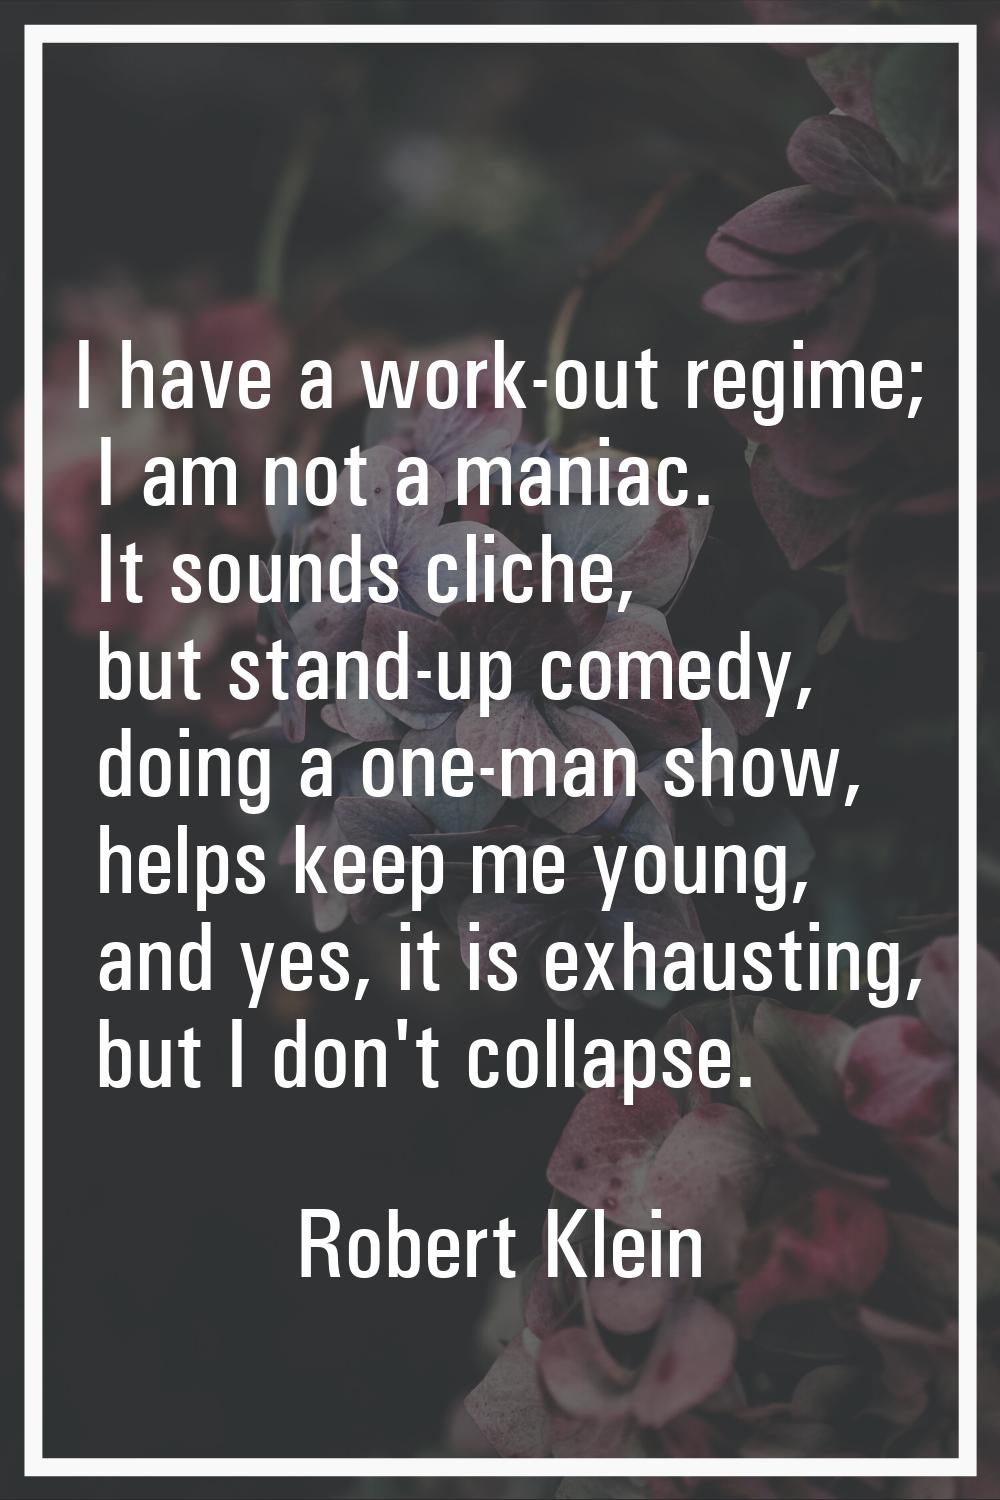 I have a work-out regime; I am not a maniac. It sounds cliche, but stand-up comedy, doing a one-man